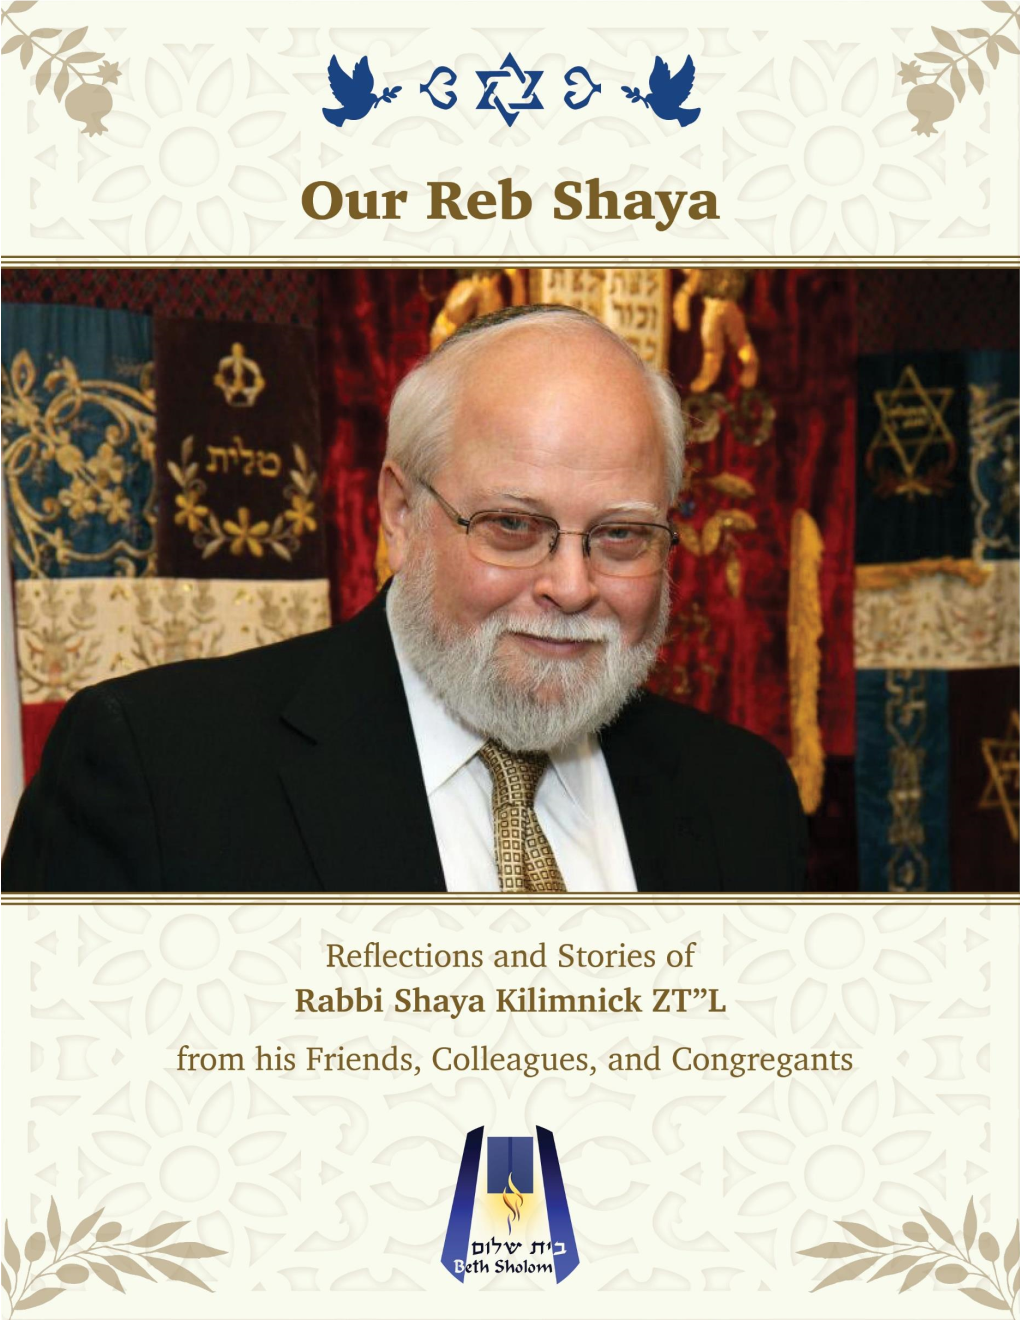 This Booklet Is a Gift from All Those Who Knew Rabbi Kilimnick – Friends, Colleagues and Congregants – to His Family, on the Occasion of the Rabbi’S Shloshim